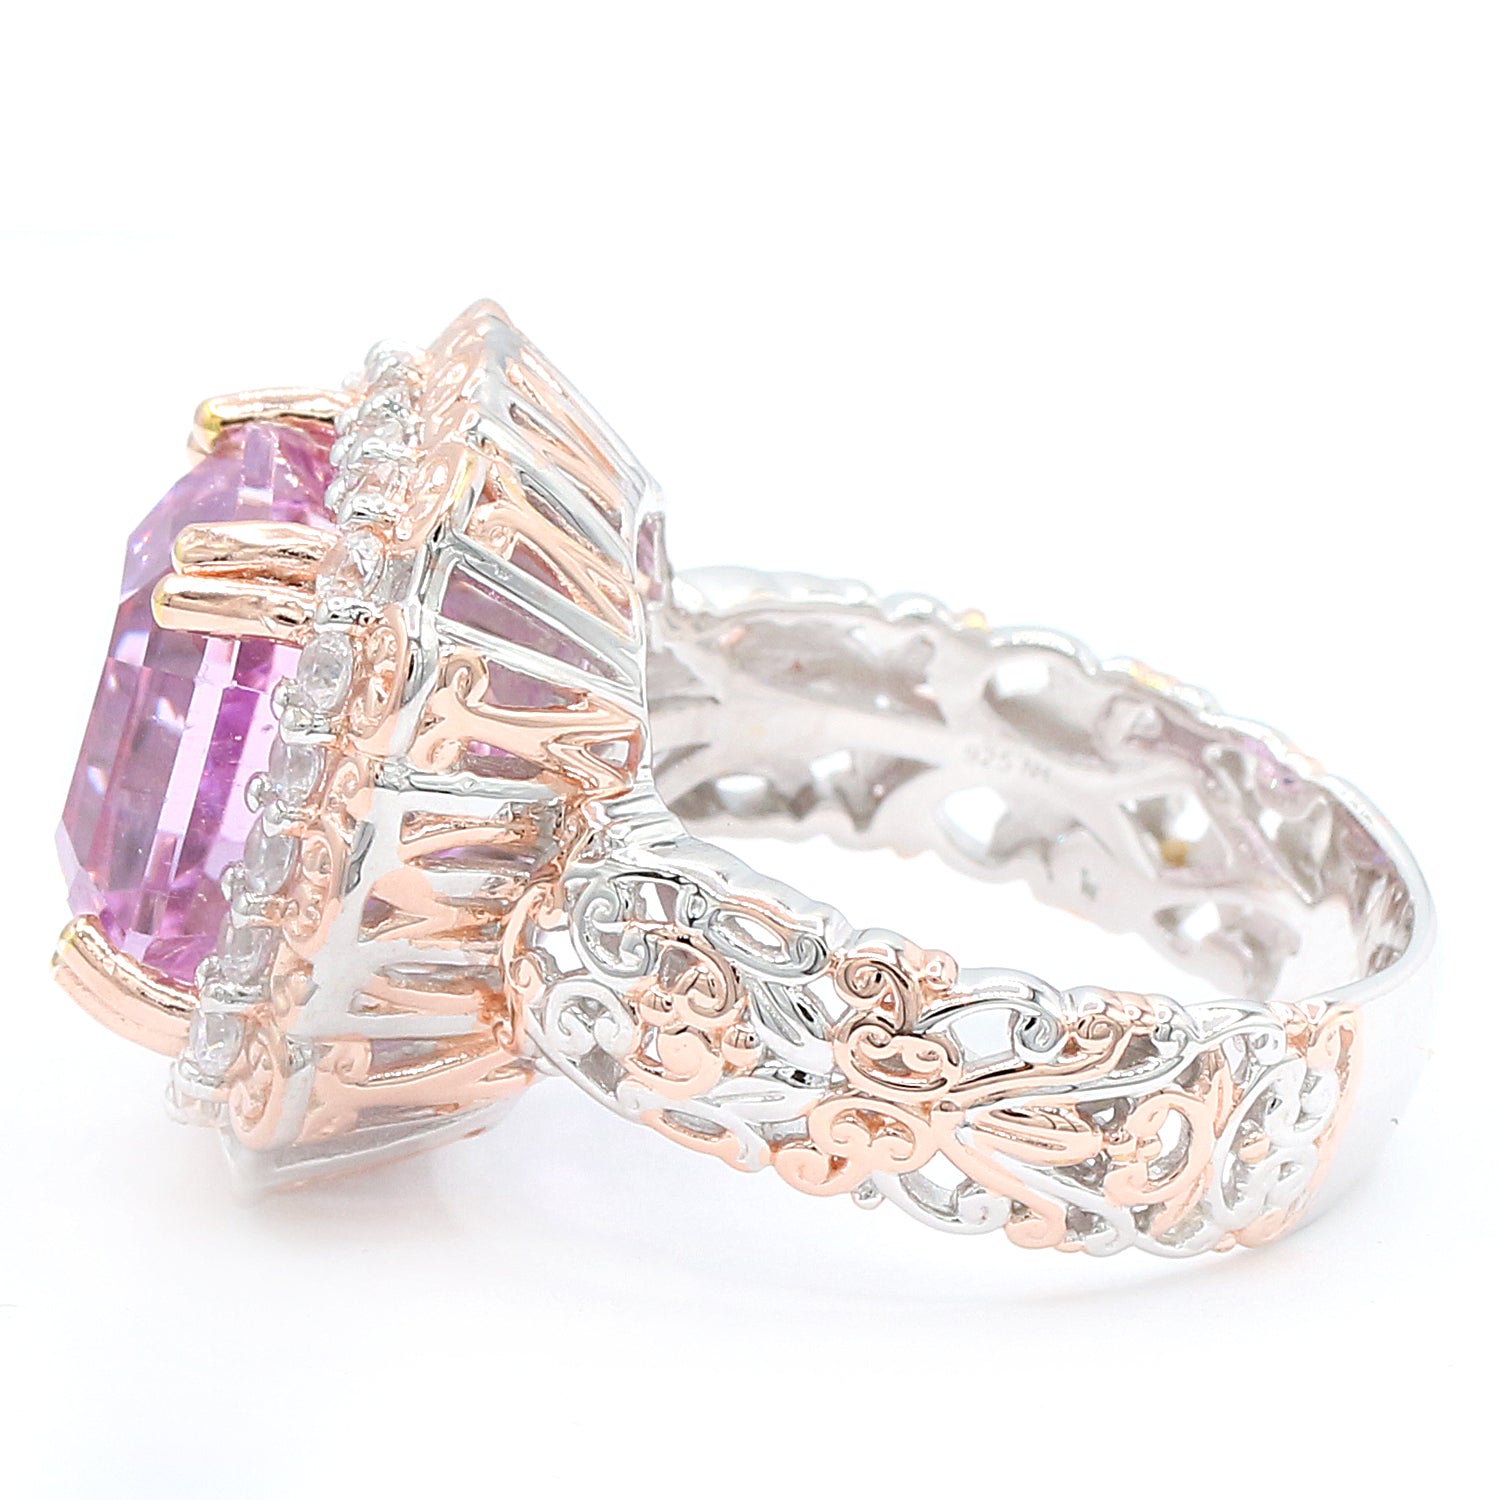 Limited Edition Gems en Vogue Luxe One-of-a-Kind 12.24ctw Kunzite & White Zircon Halo Ring